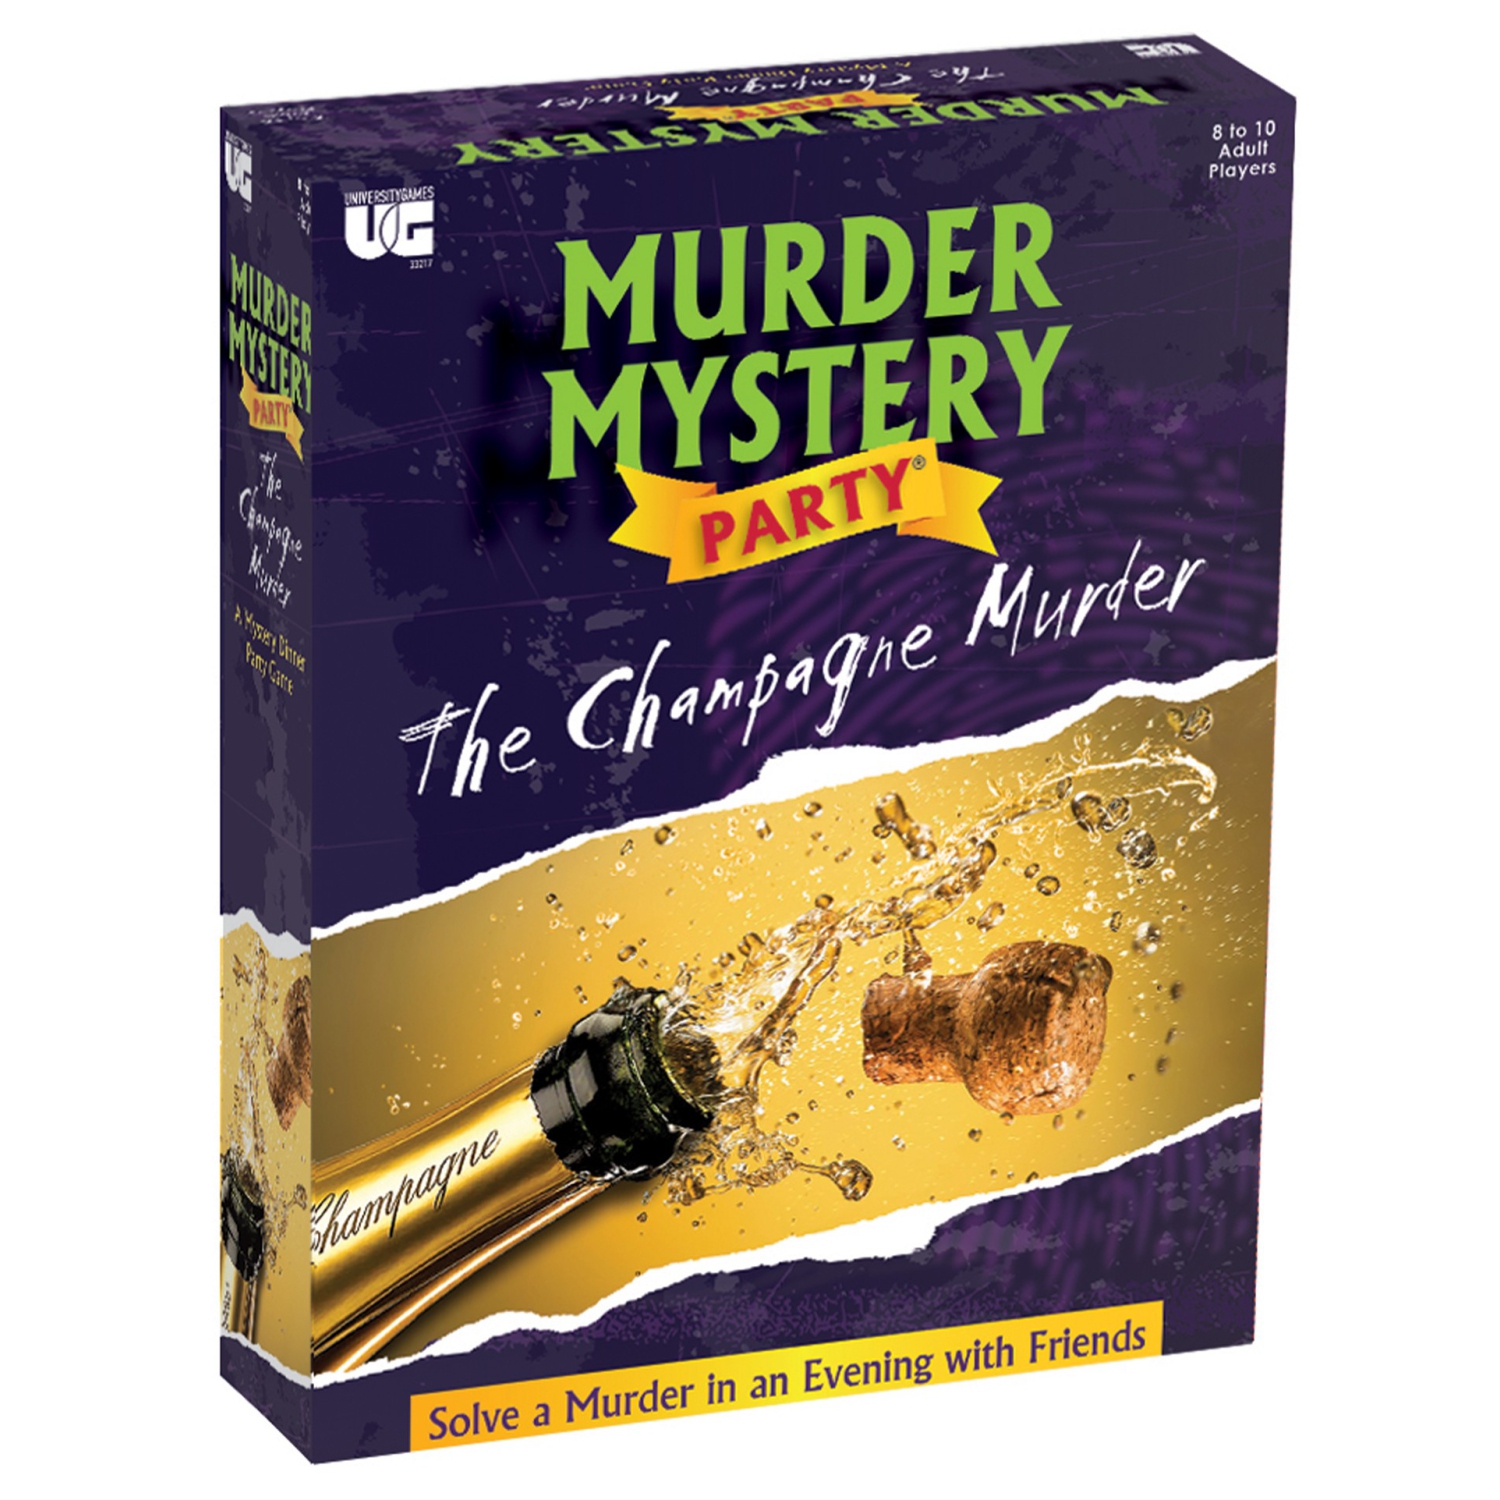 Murder Mystery Party: The Champagne Murder 8-10 players, ages 18+, 120 minutes